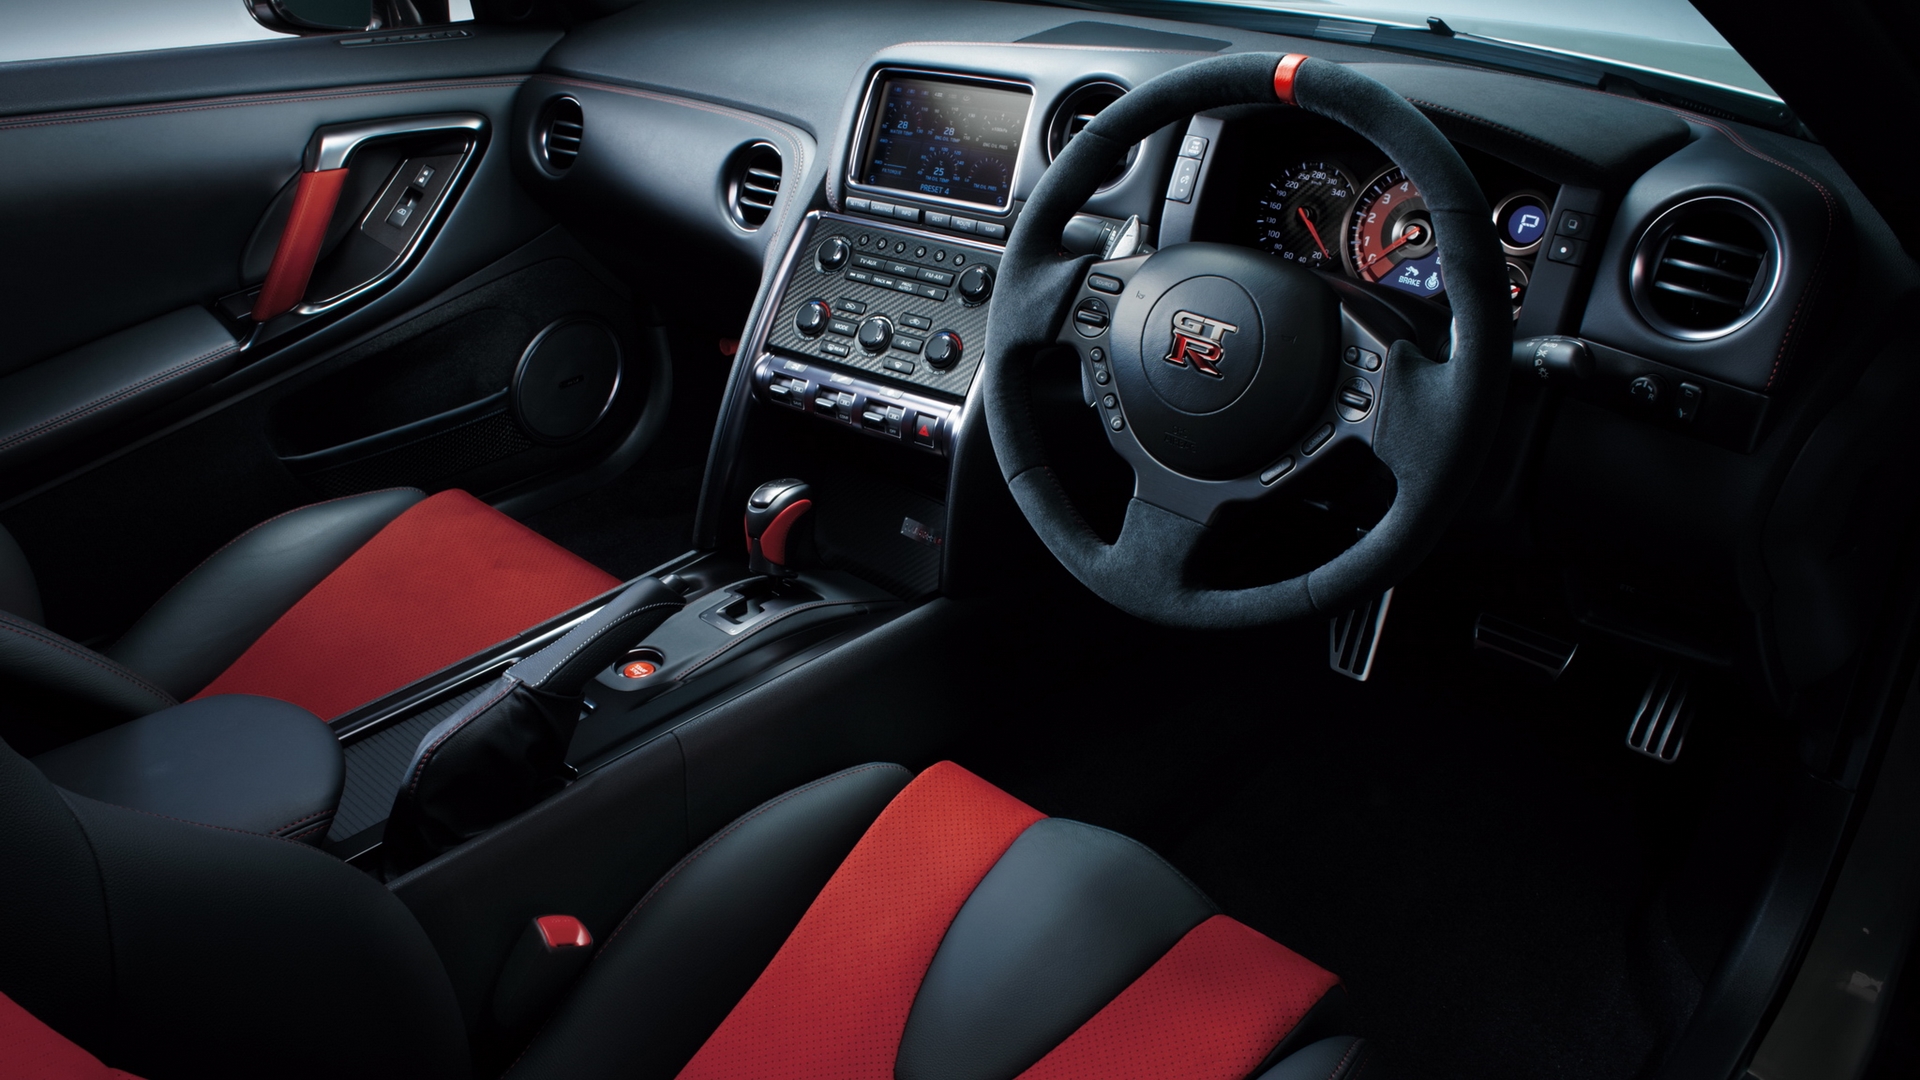 Wallpapers Nissan GRT interior right-hand drive on the desktop